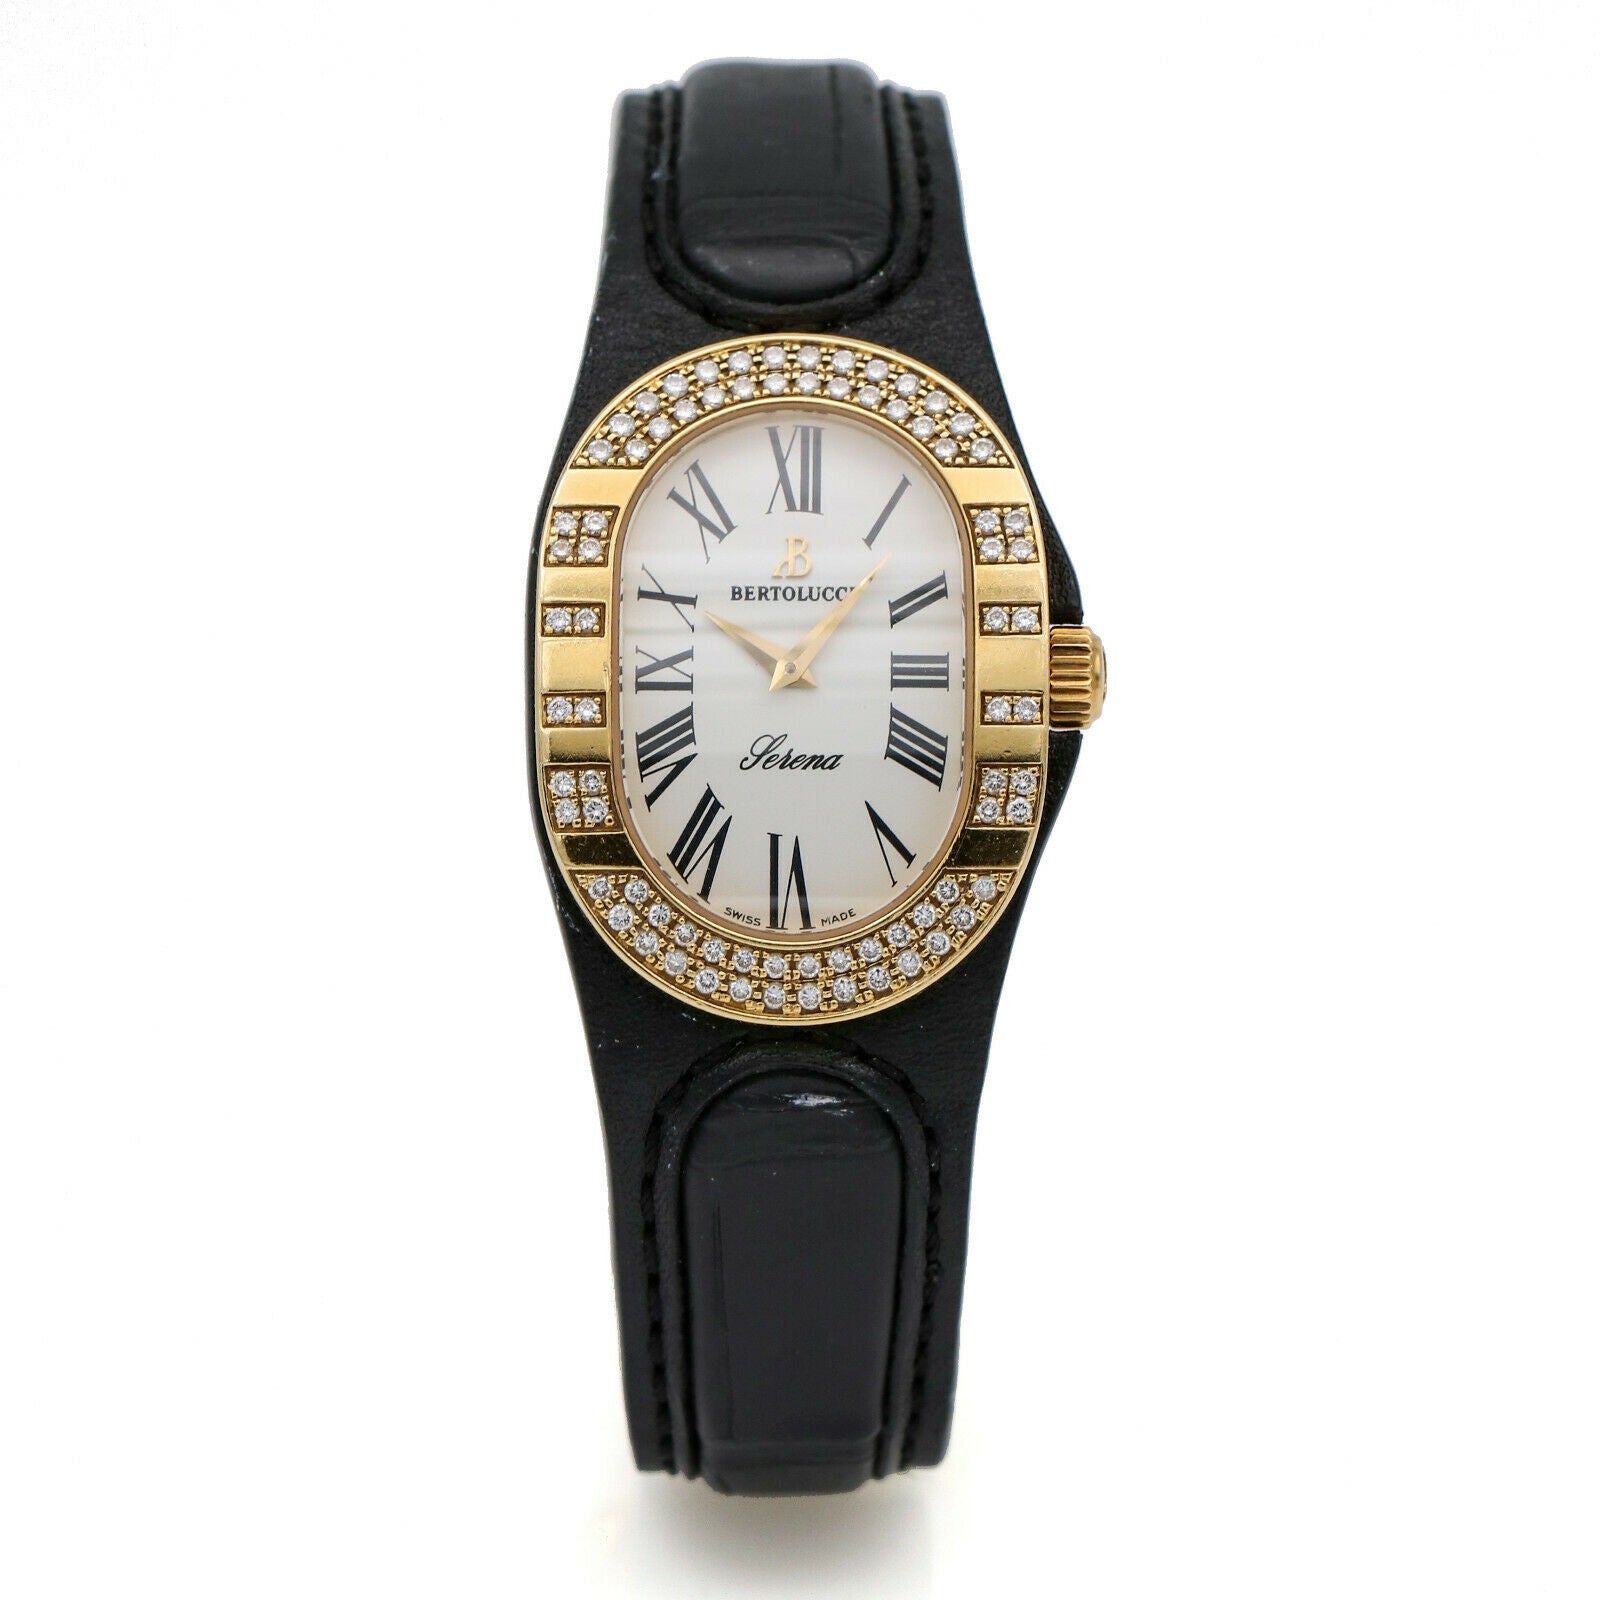 Bertolucci Serena 18k Yellow Gold Watch with Diamond Bezel With Box & Papers